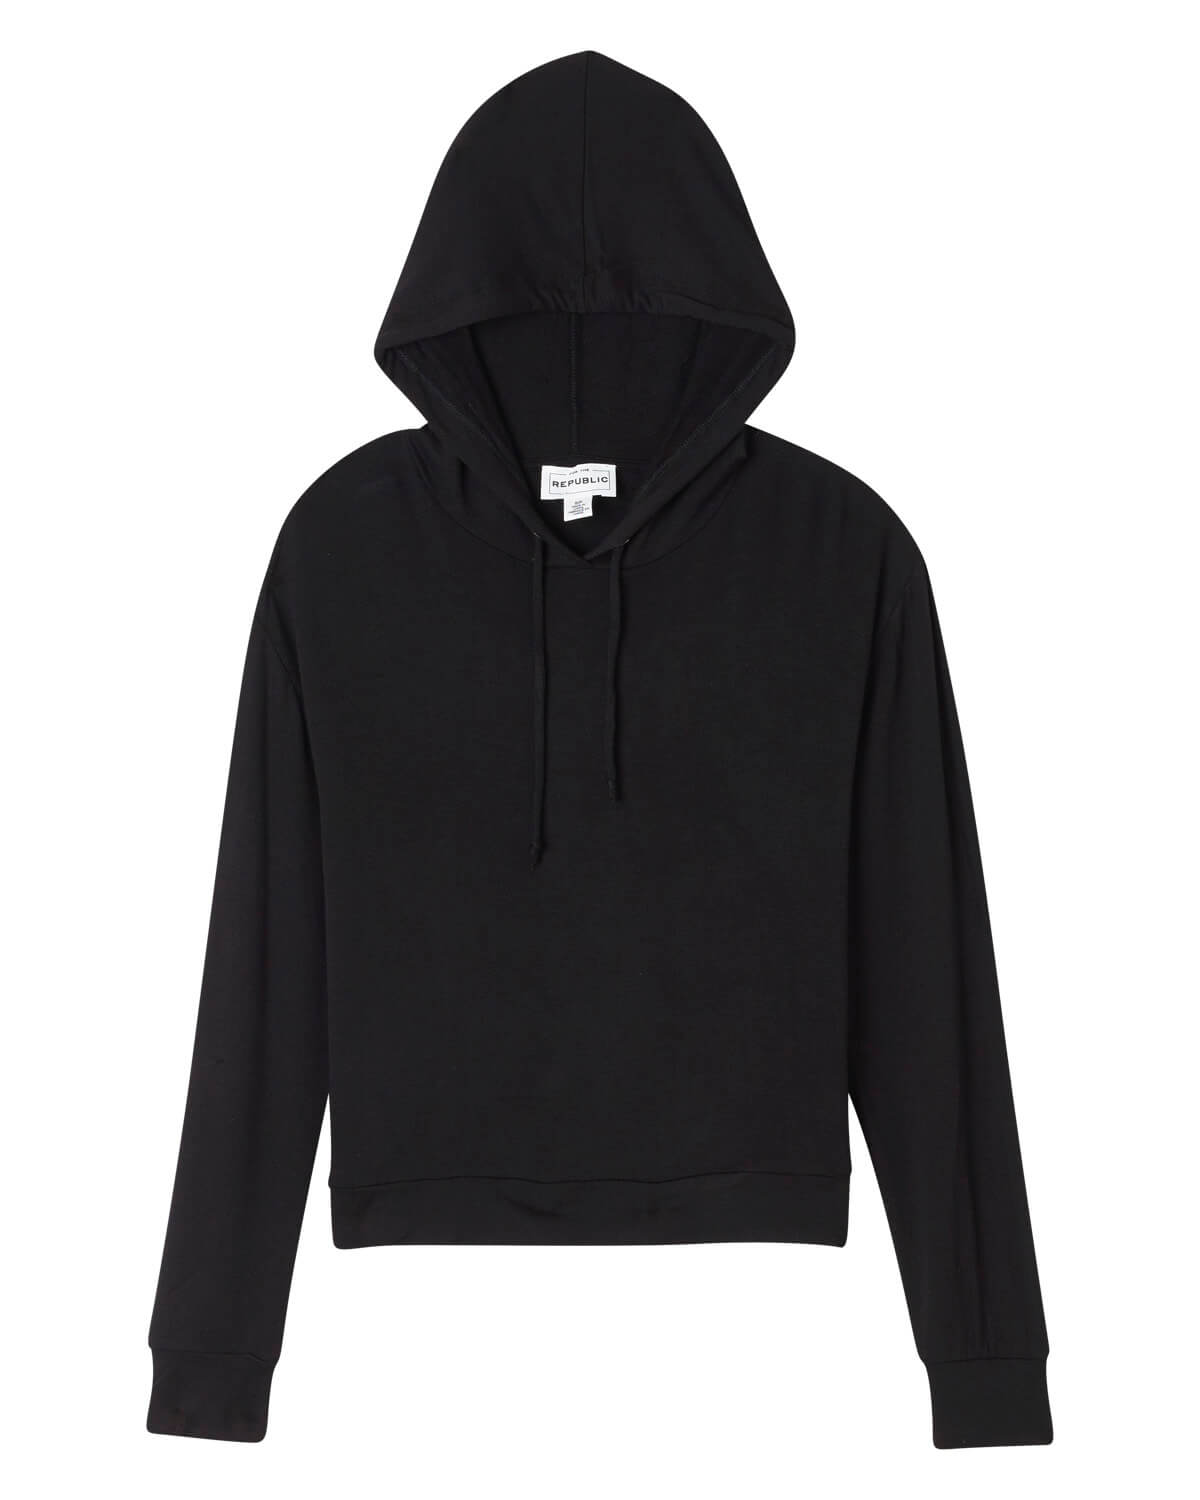 For The Republic Women's Drawstring French Terry Hoodie | JANE + MERCER